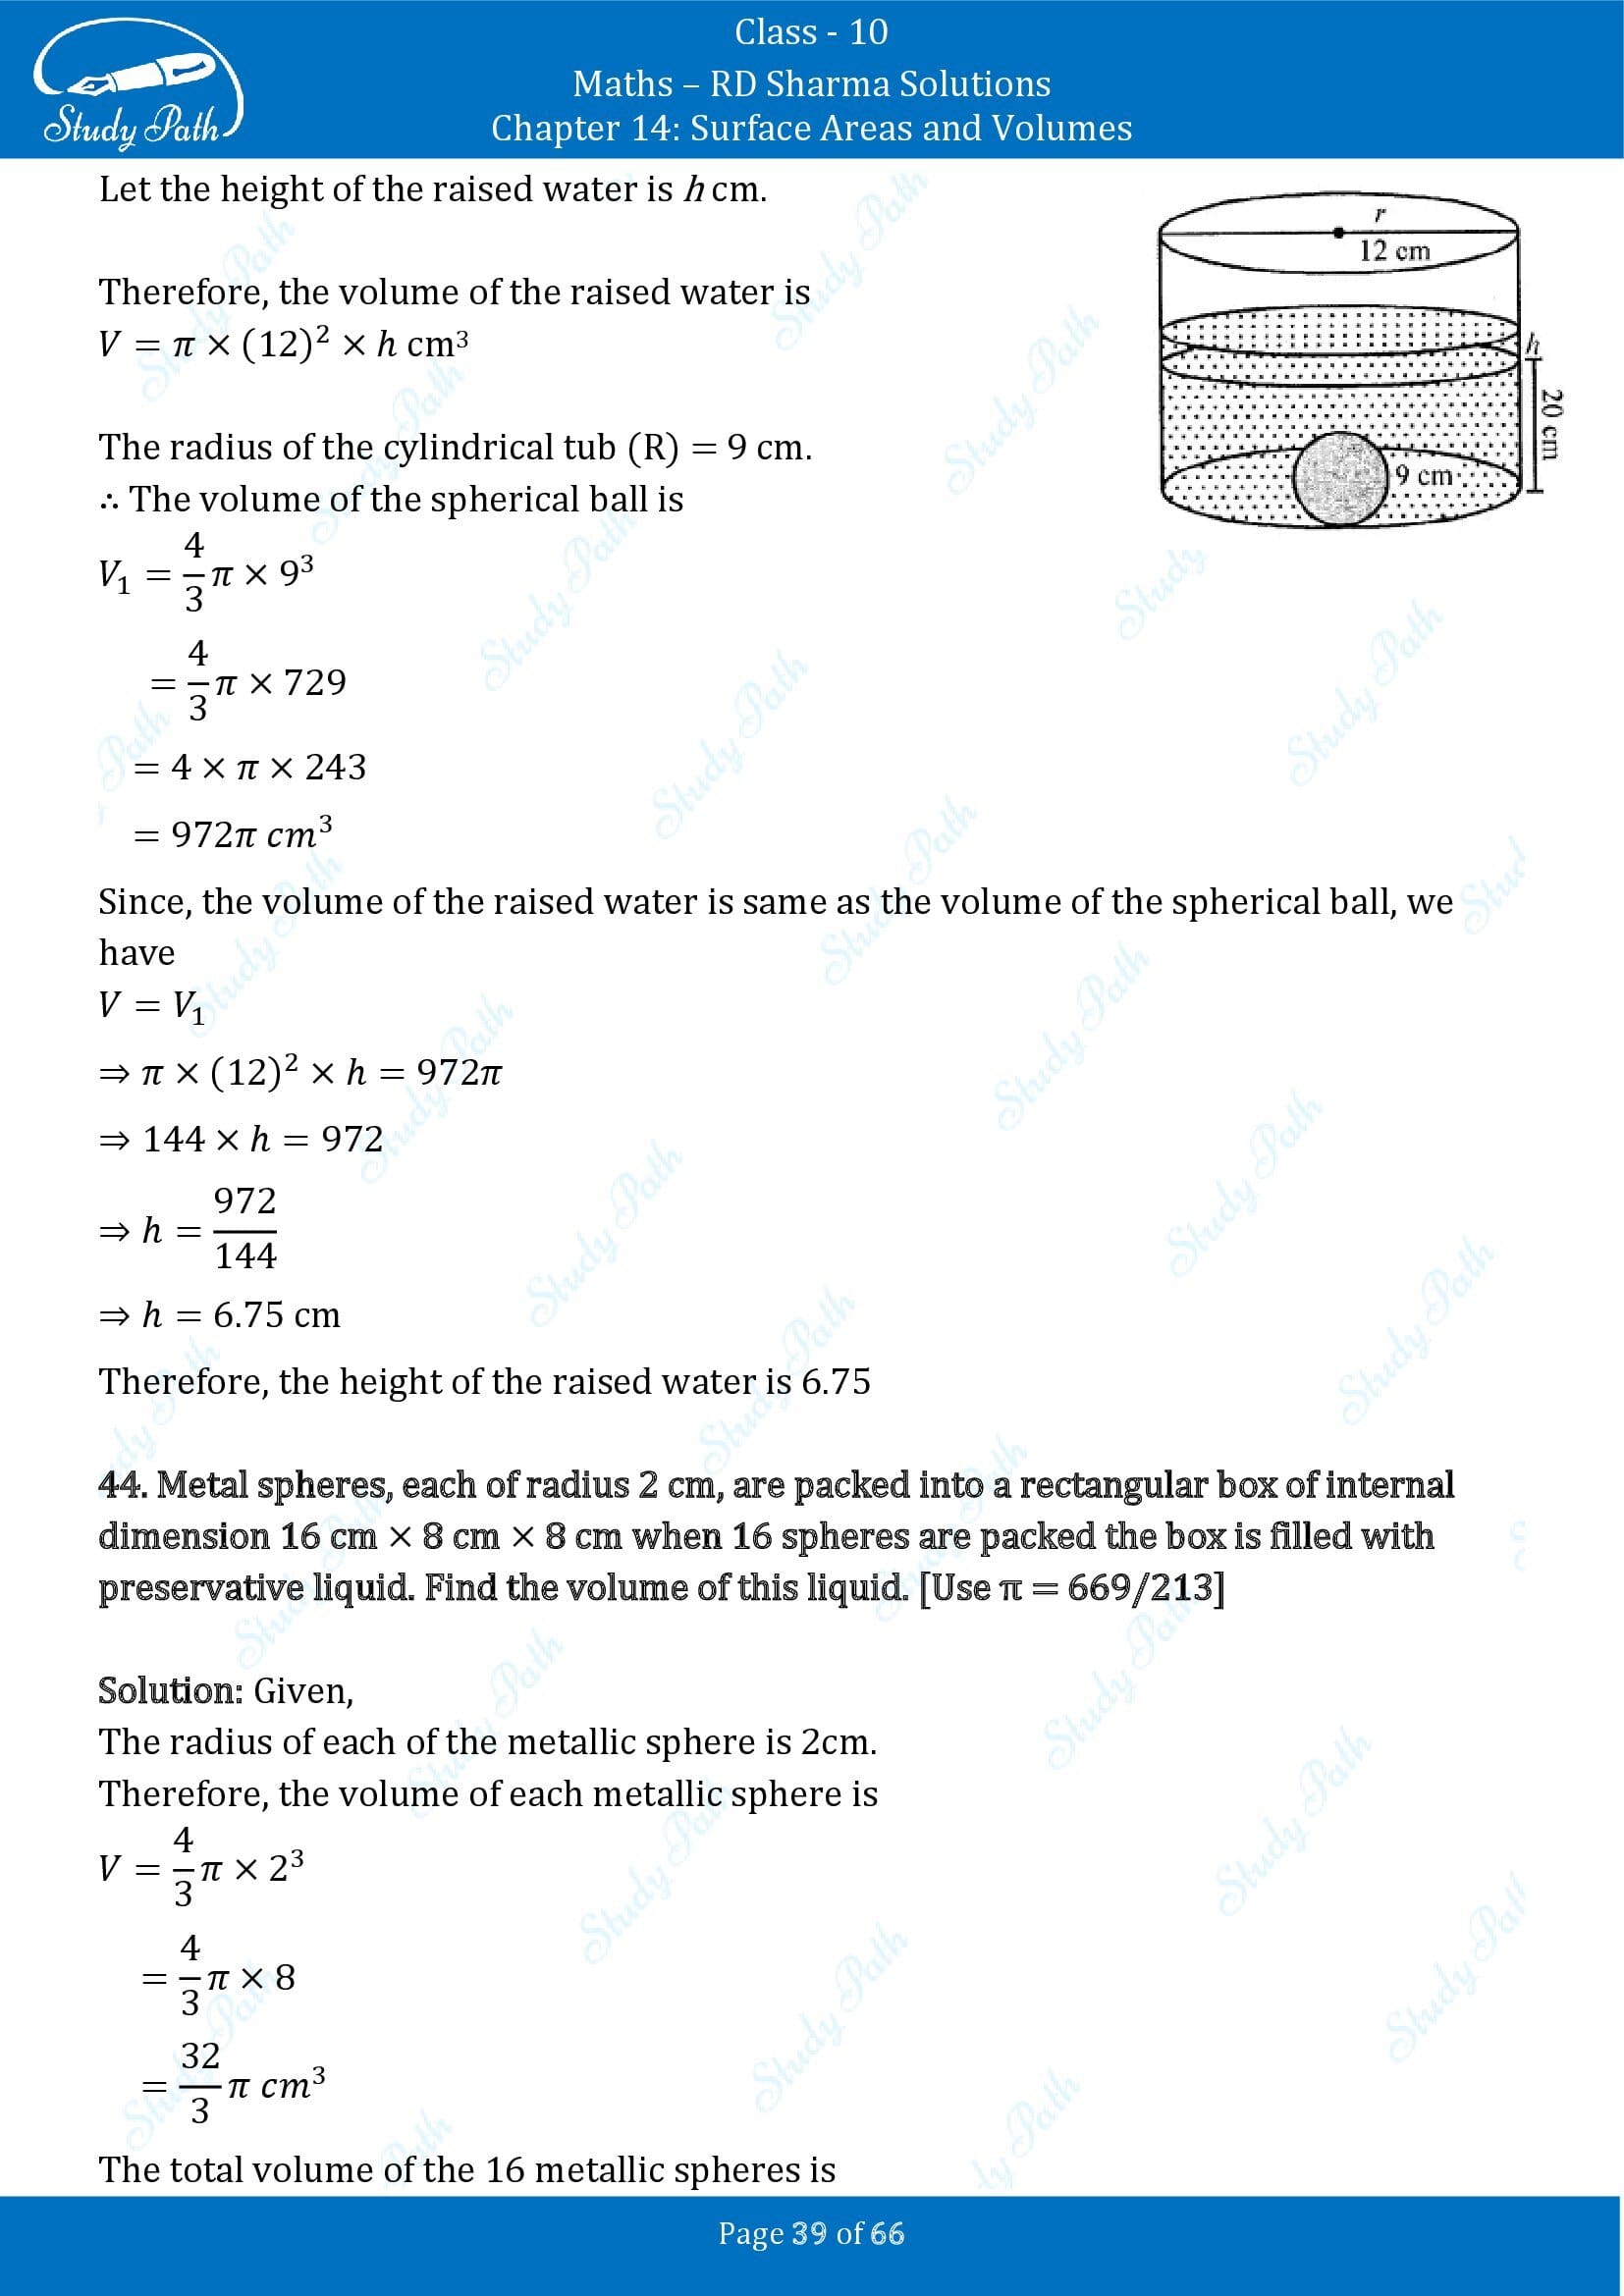 RD Sharma Solutions Class 10 Chapter 14 Surface Areas and Volumes Exercise 14.1 00039